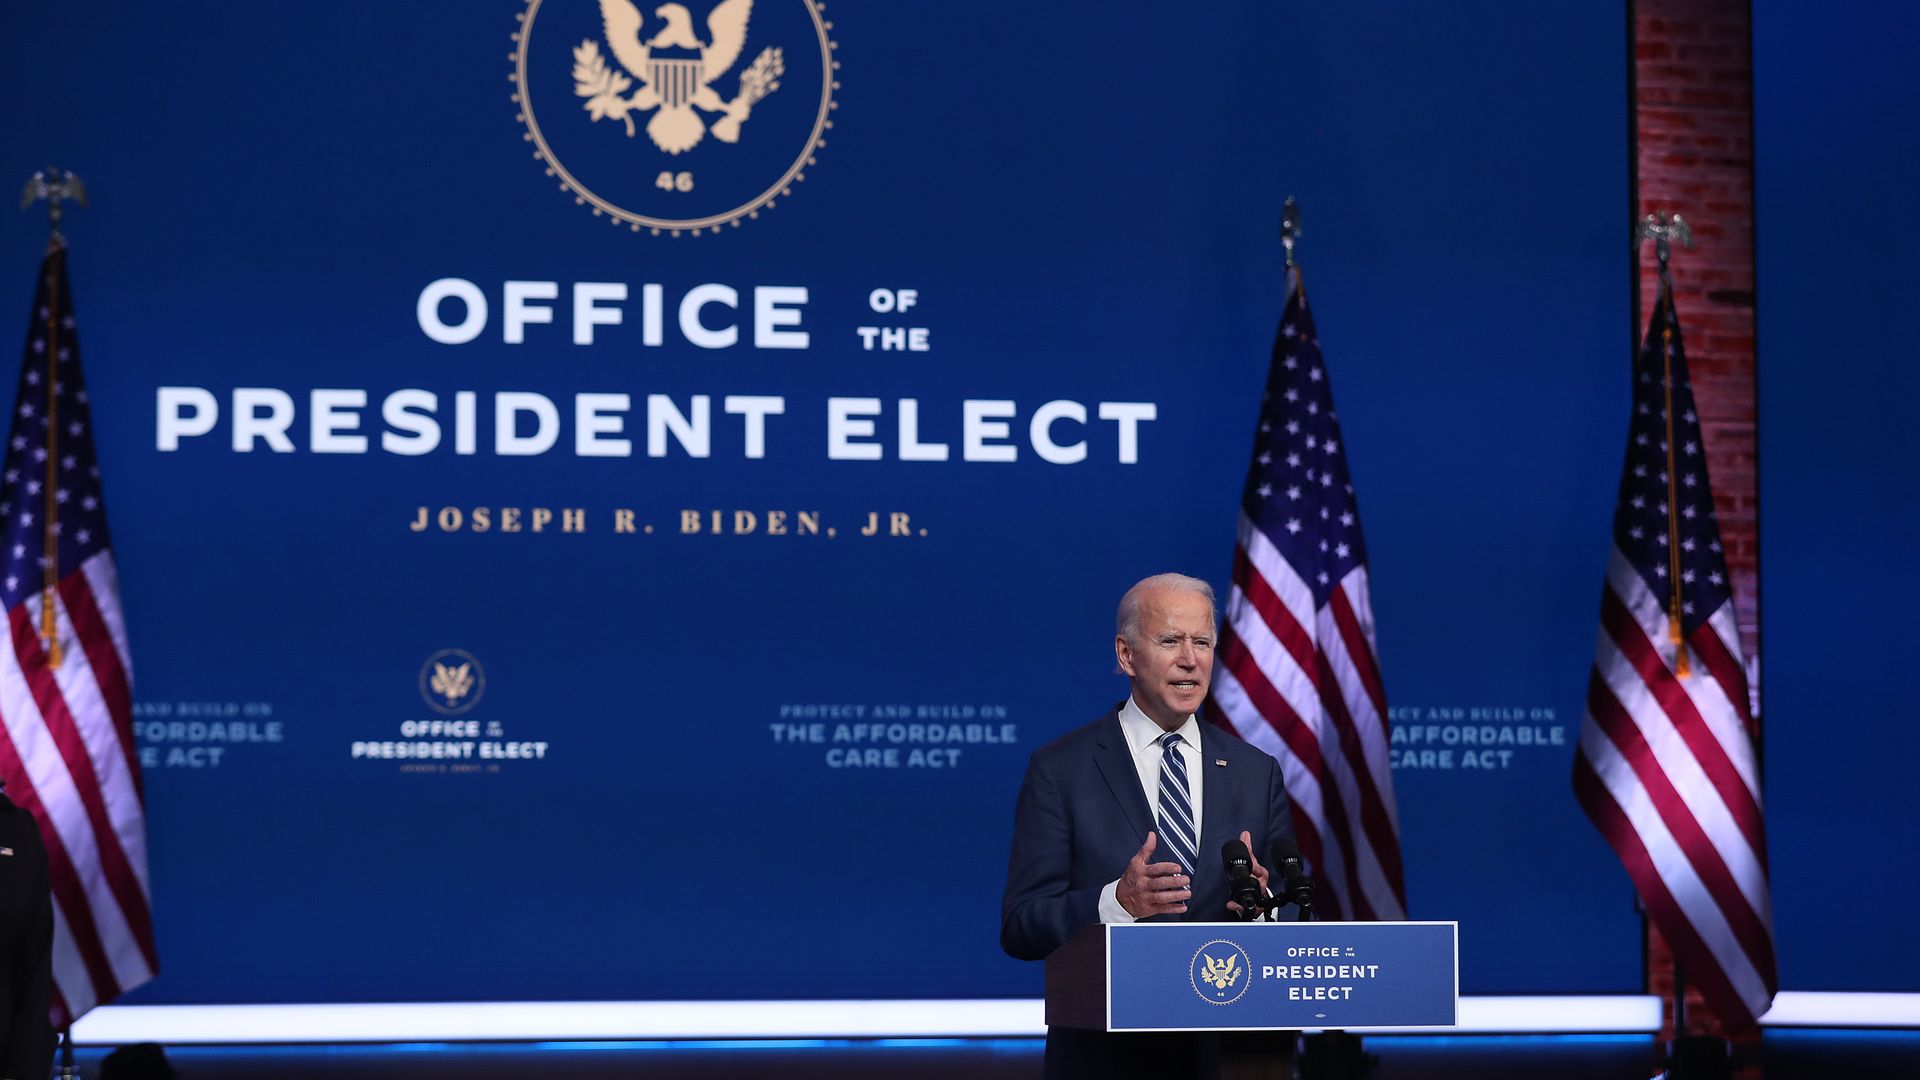 A photo of Joe Biden standing at a lectern to give an address, with "Office of the President Elect" in large lettering behind him